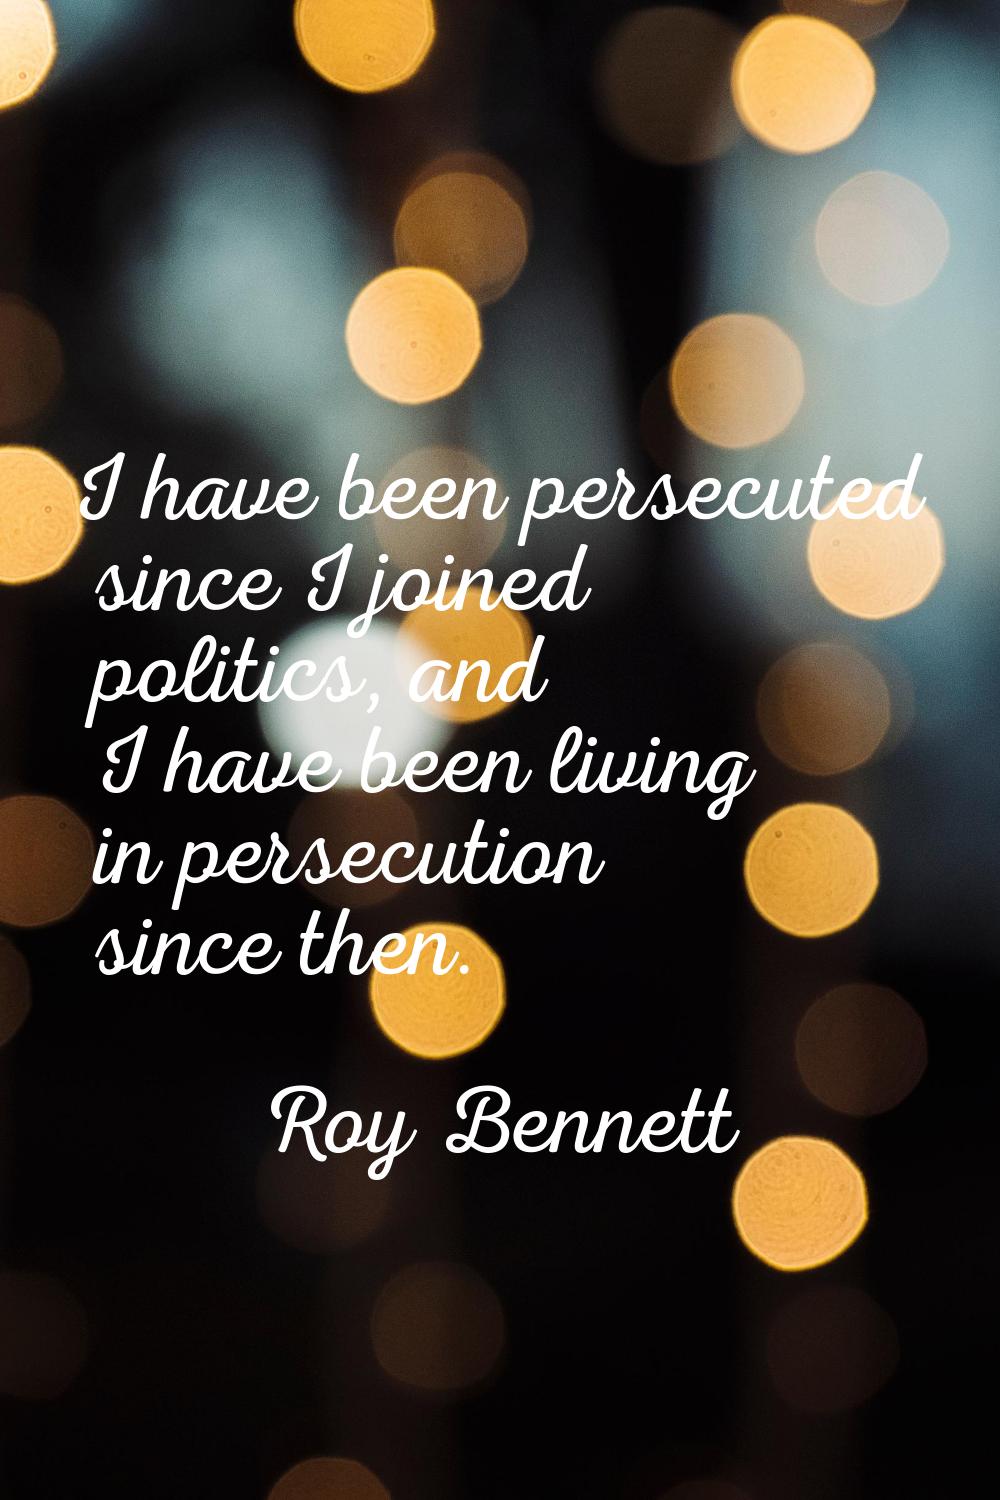 I have been persecuted since I joined politics, and I have been living in persecution since then.